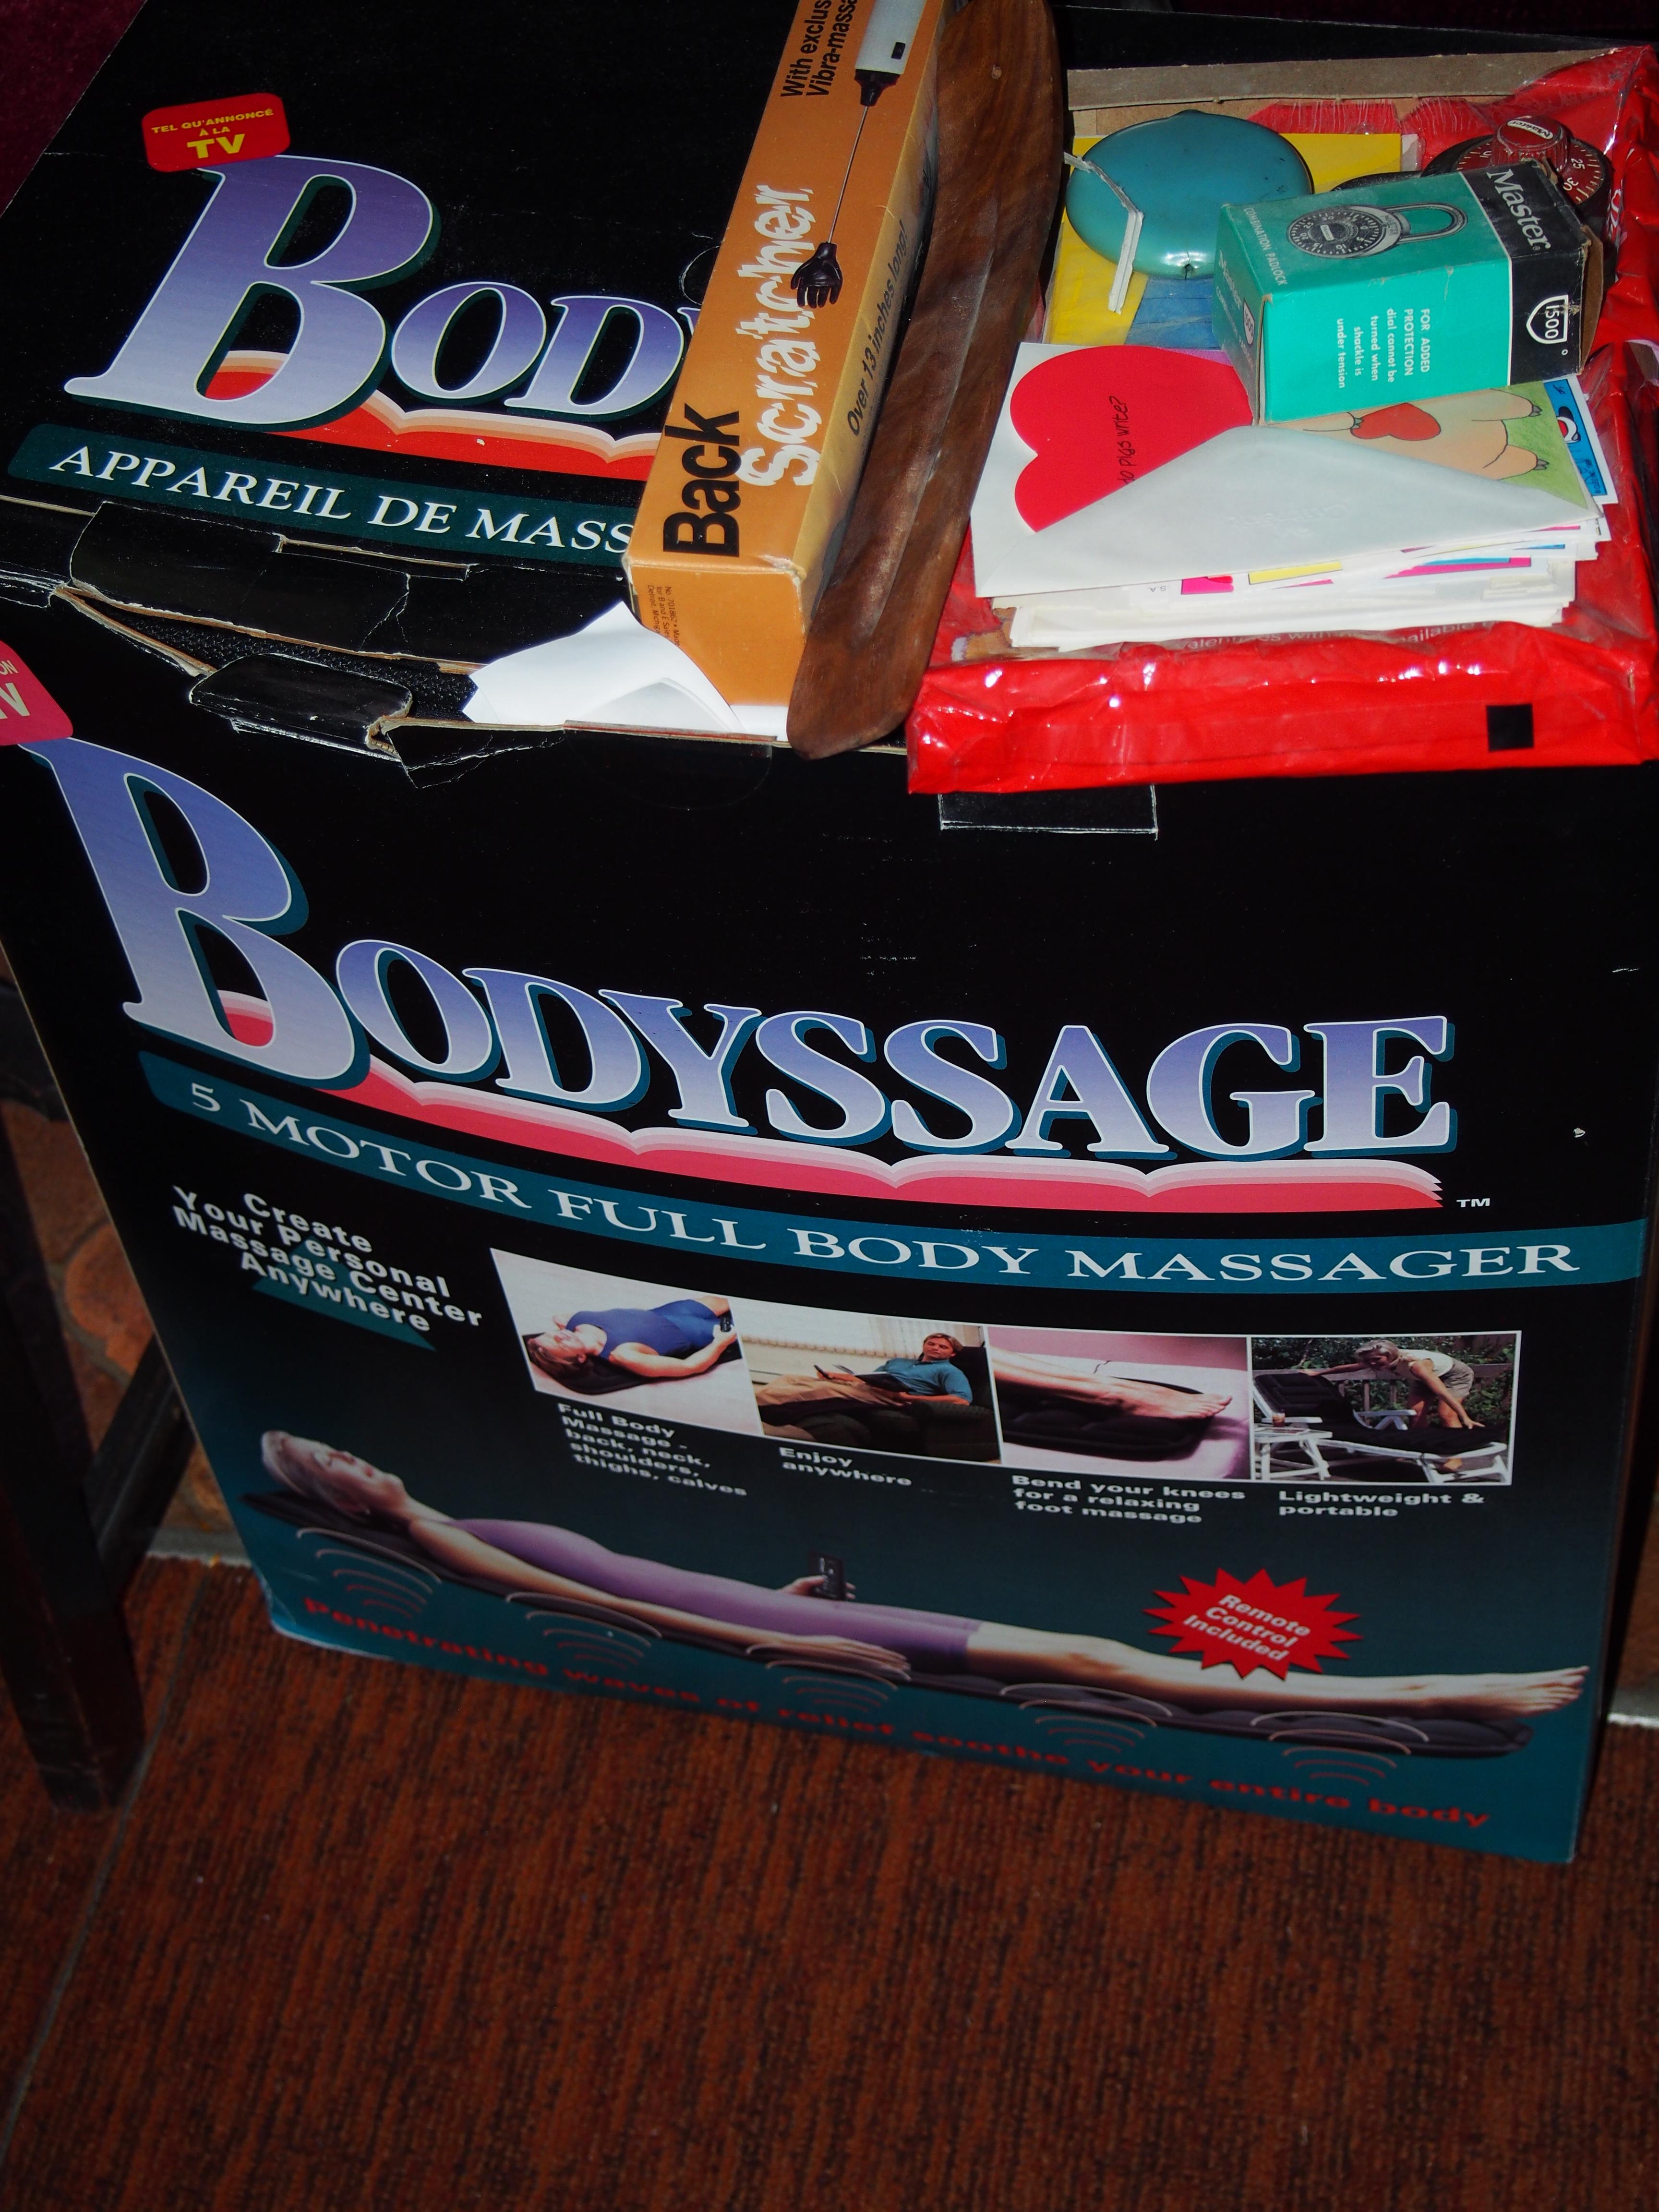 Bodyssage massager and miscellaneous